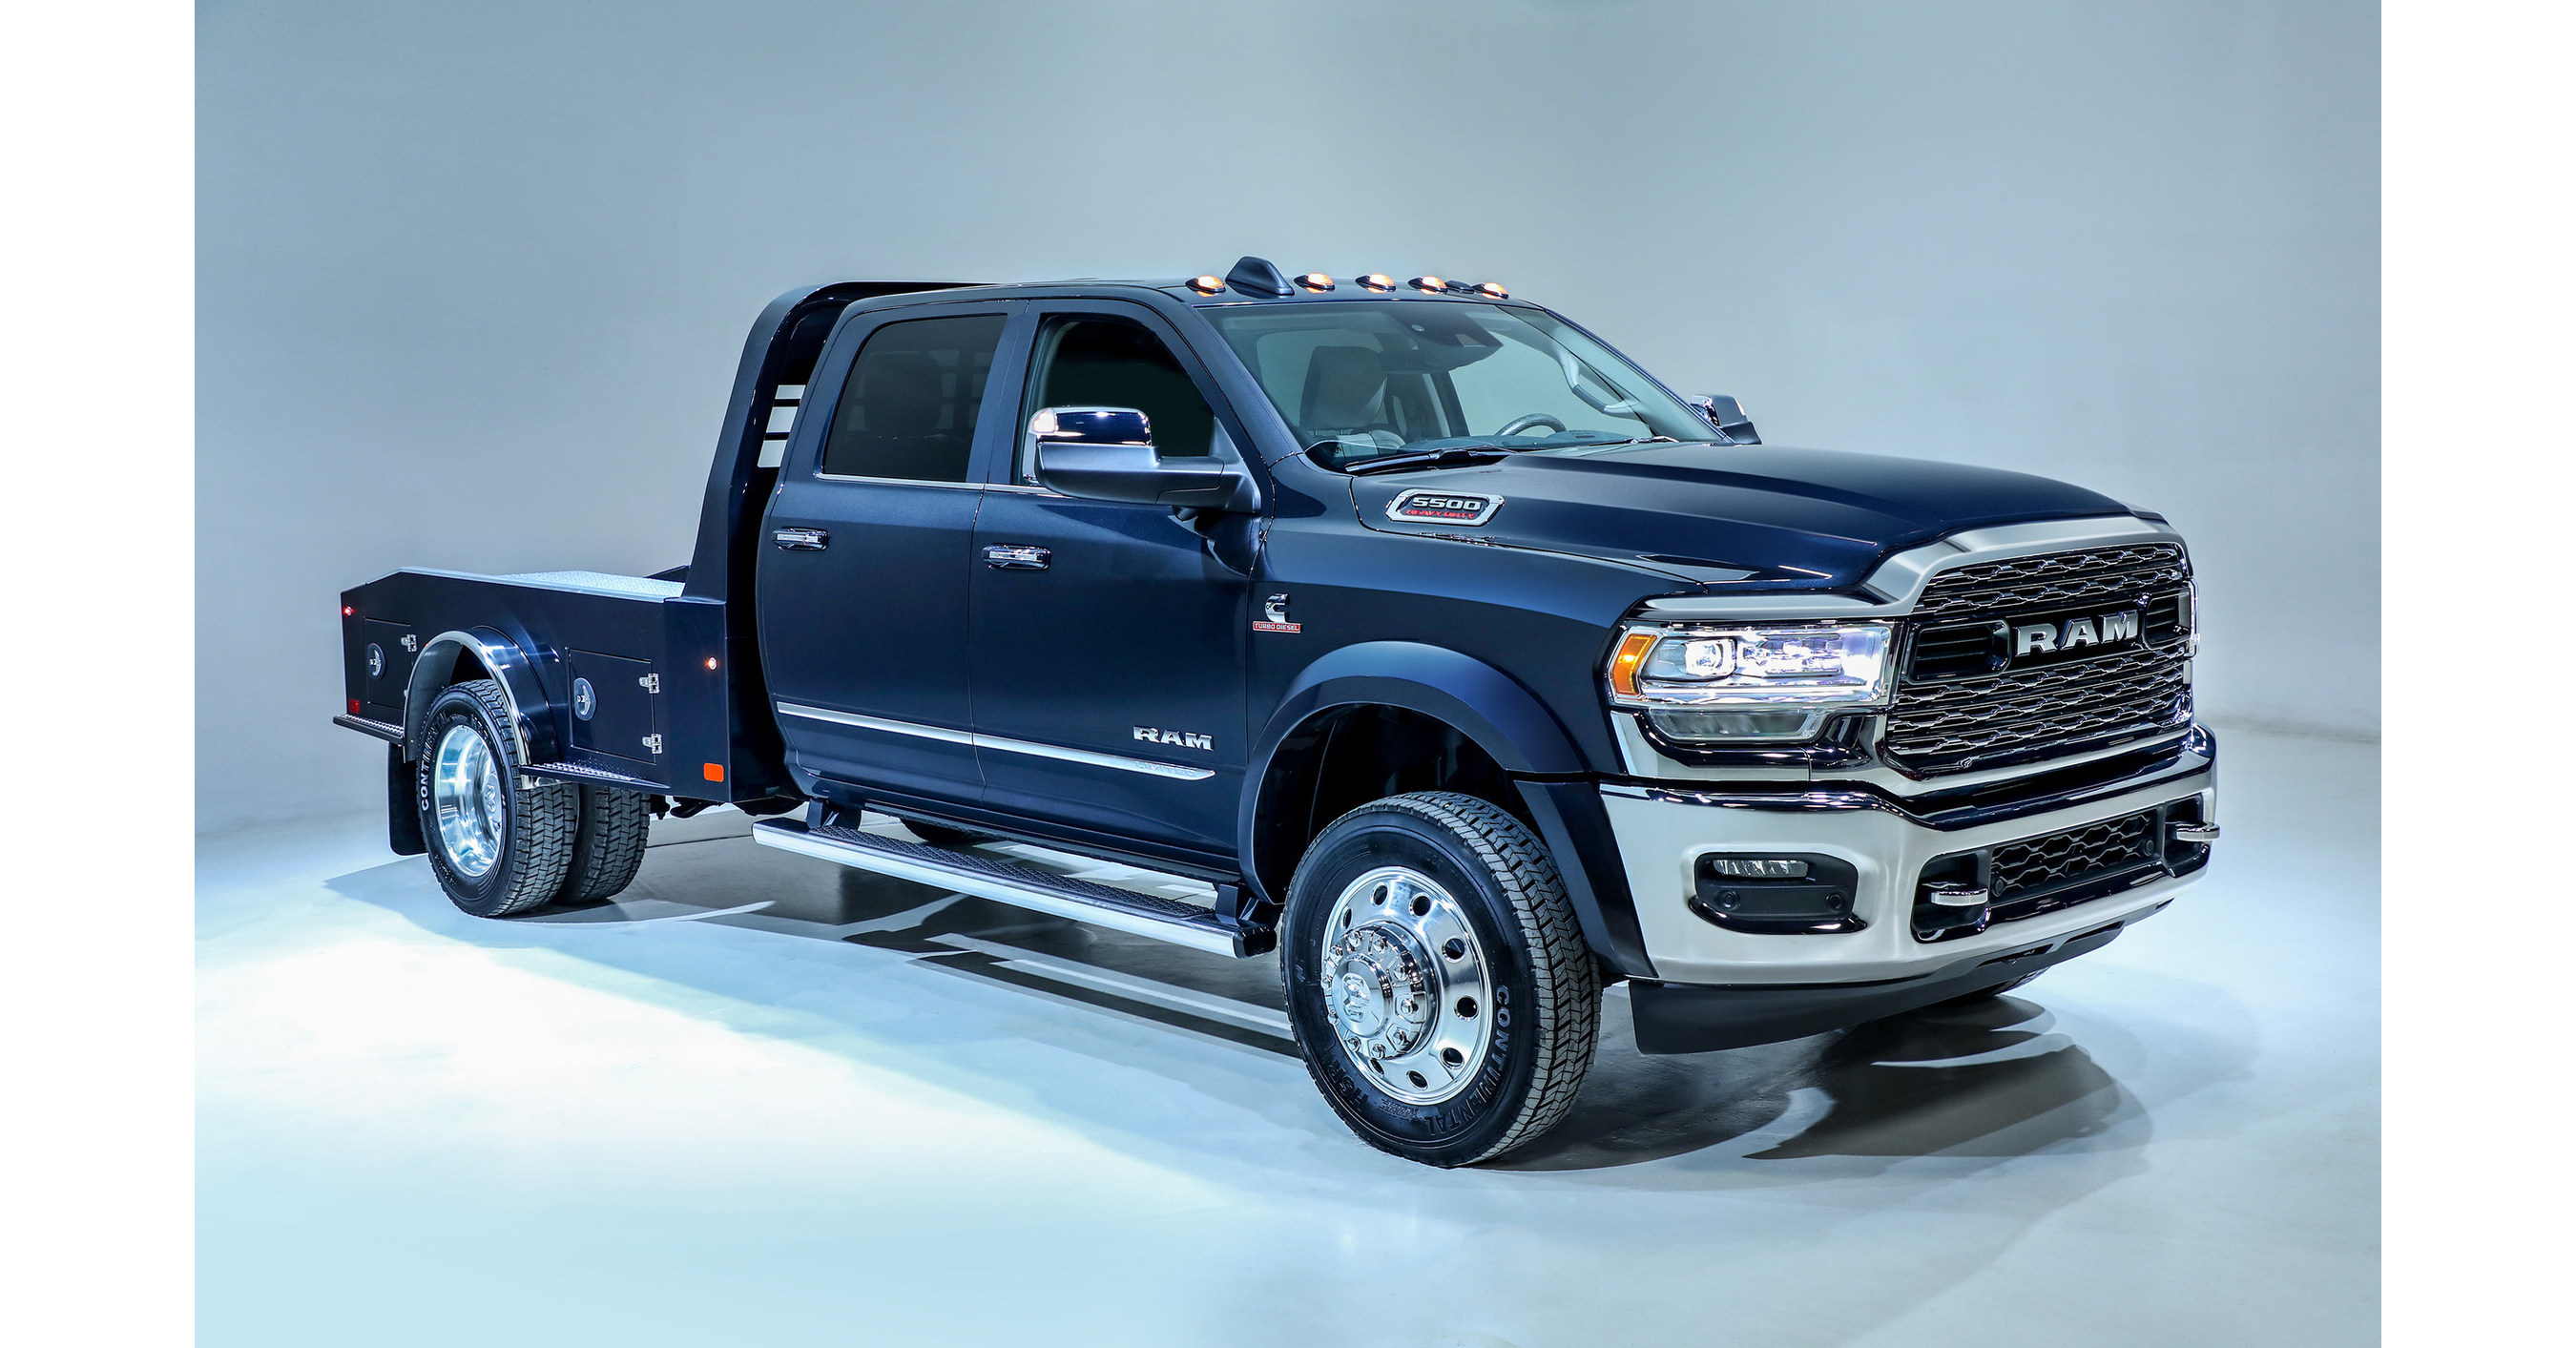 2019 Ram Chassis Cab Brings the Highest Capability, Technology and Comfort to Commercial Truck Segment